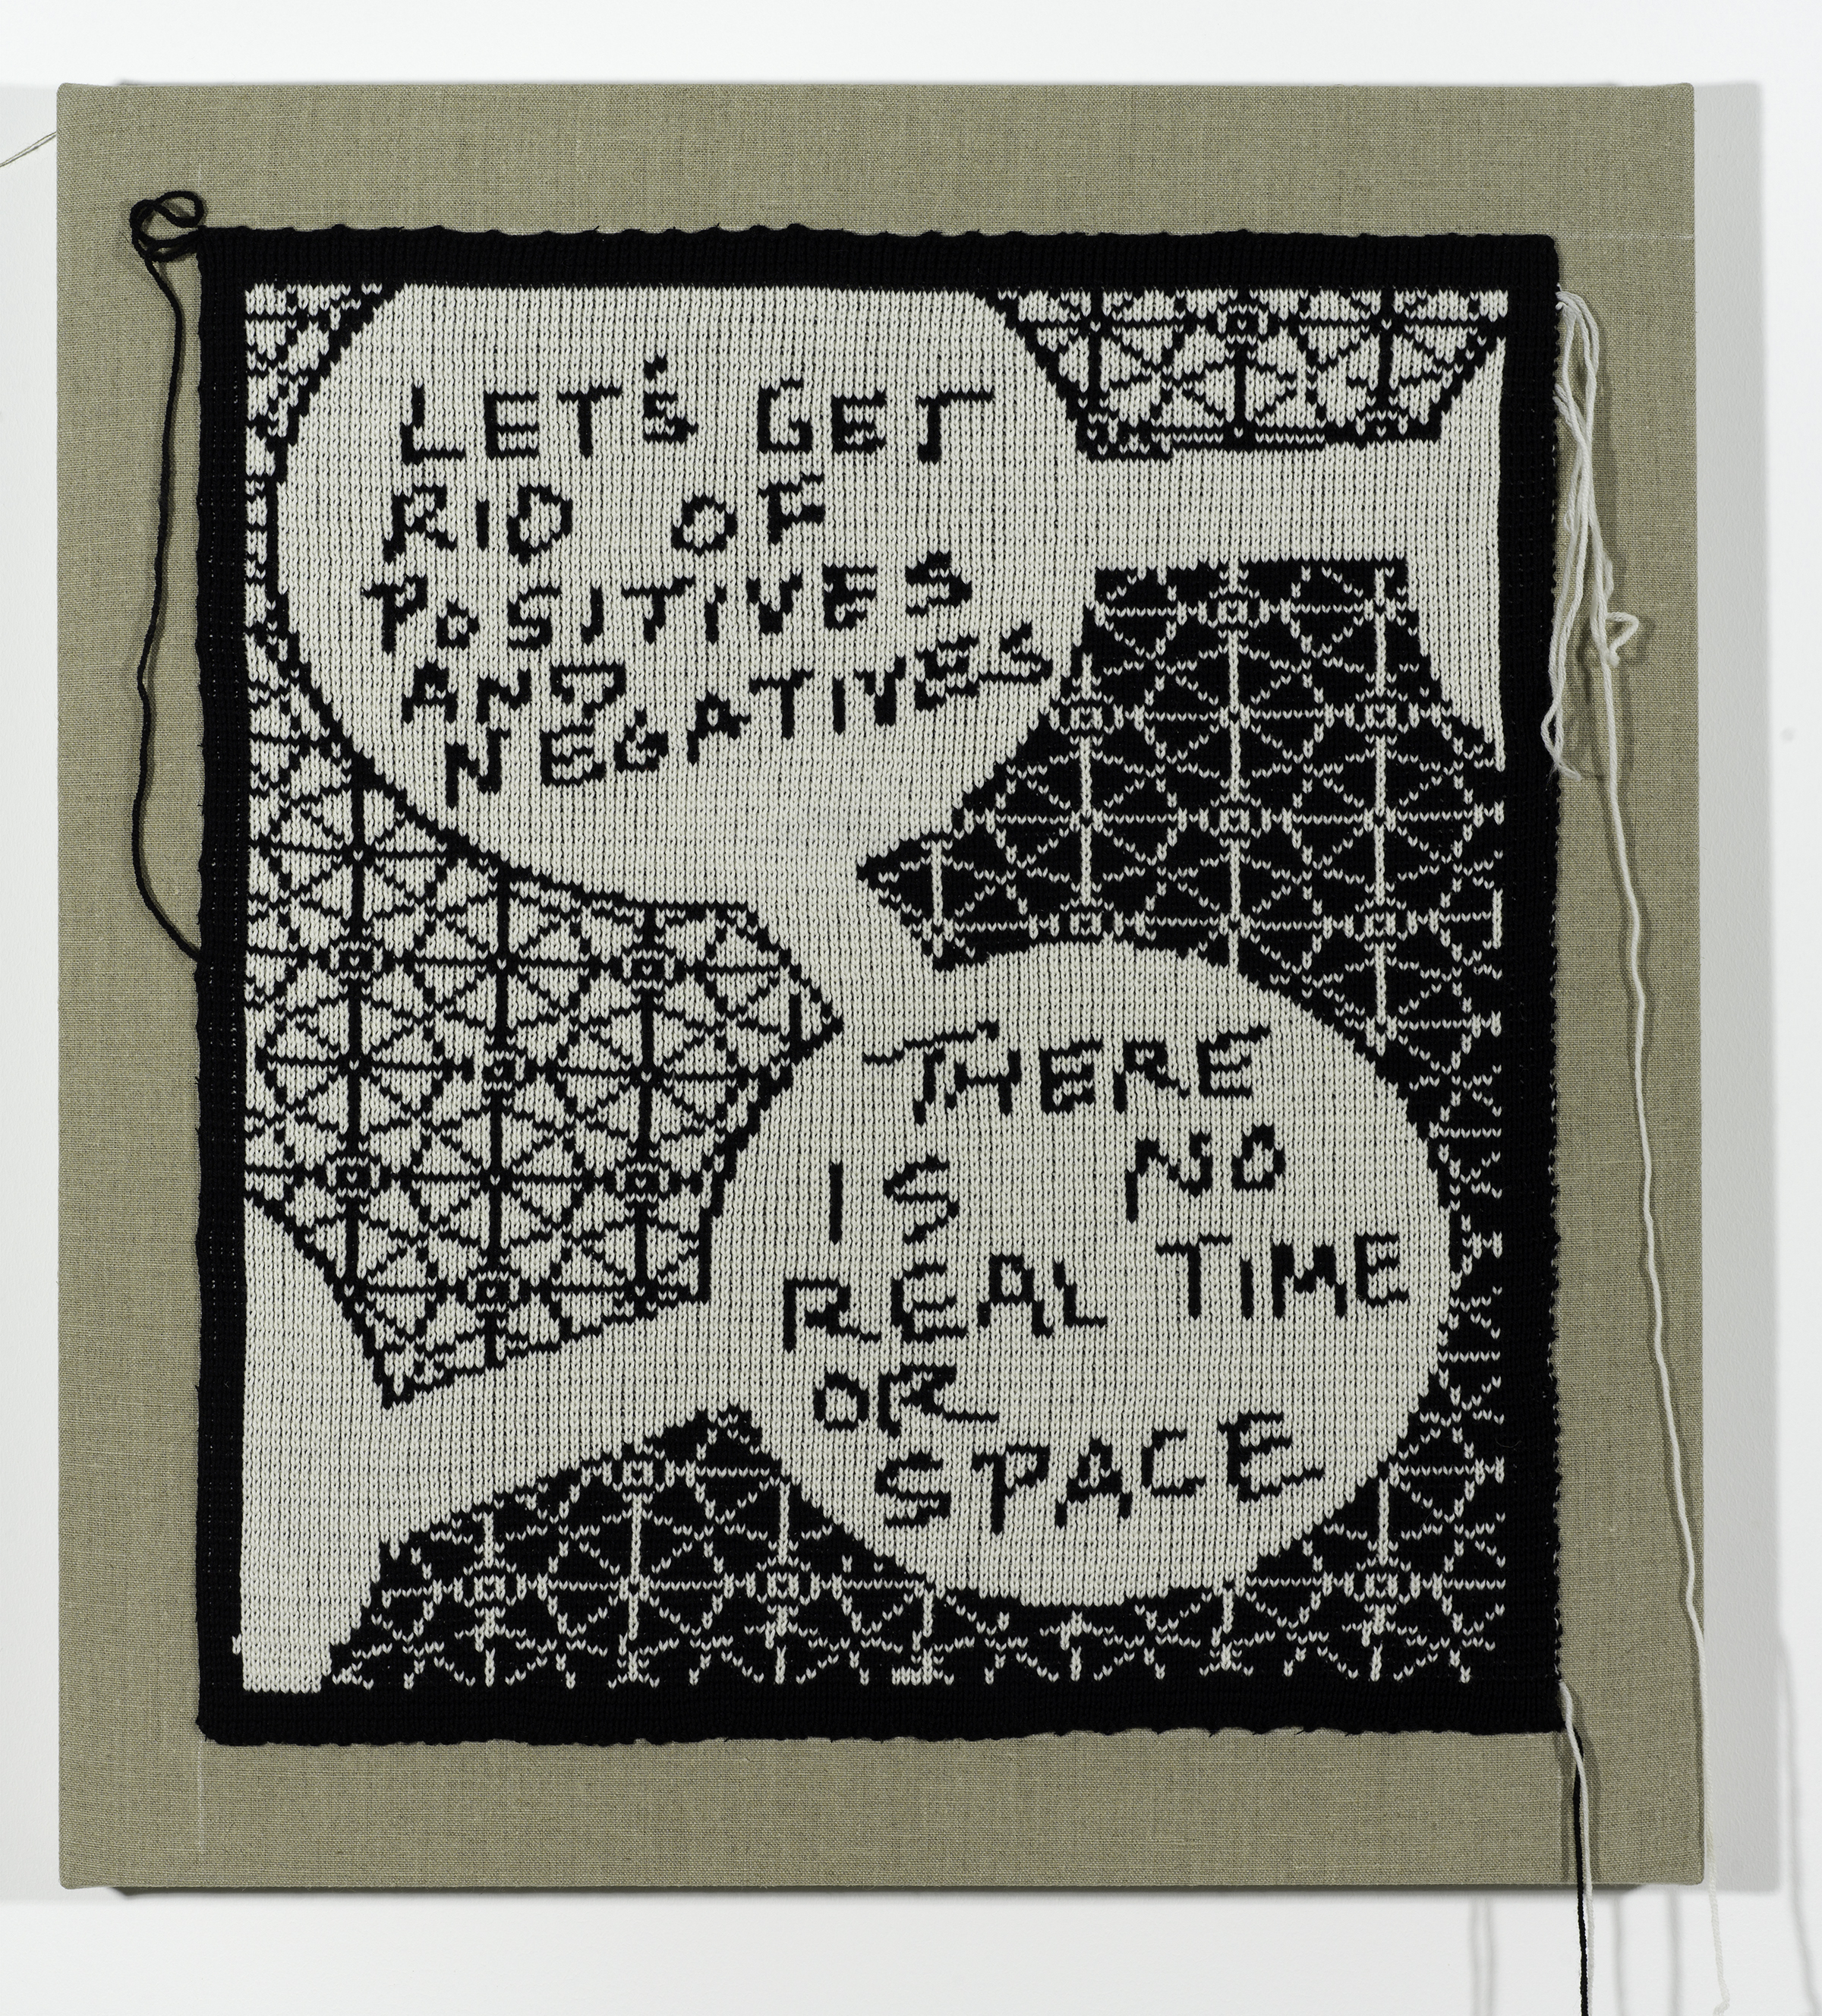  Let’s Get Rid of Positives and Negatives (Positive), 2014 